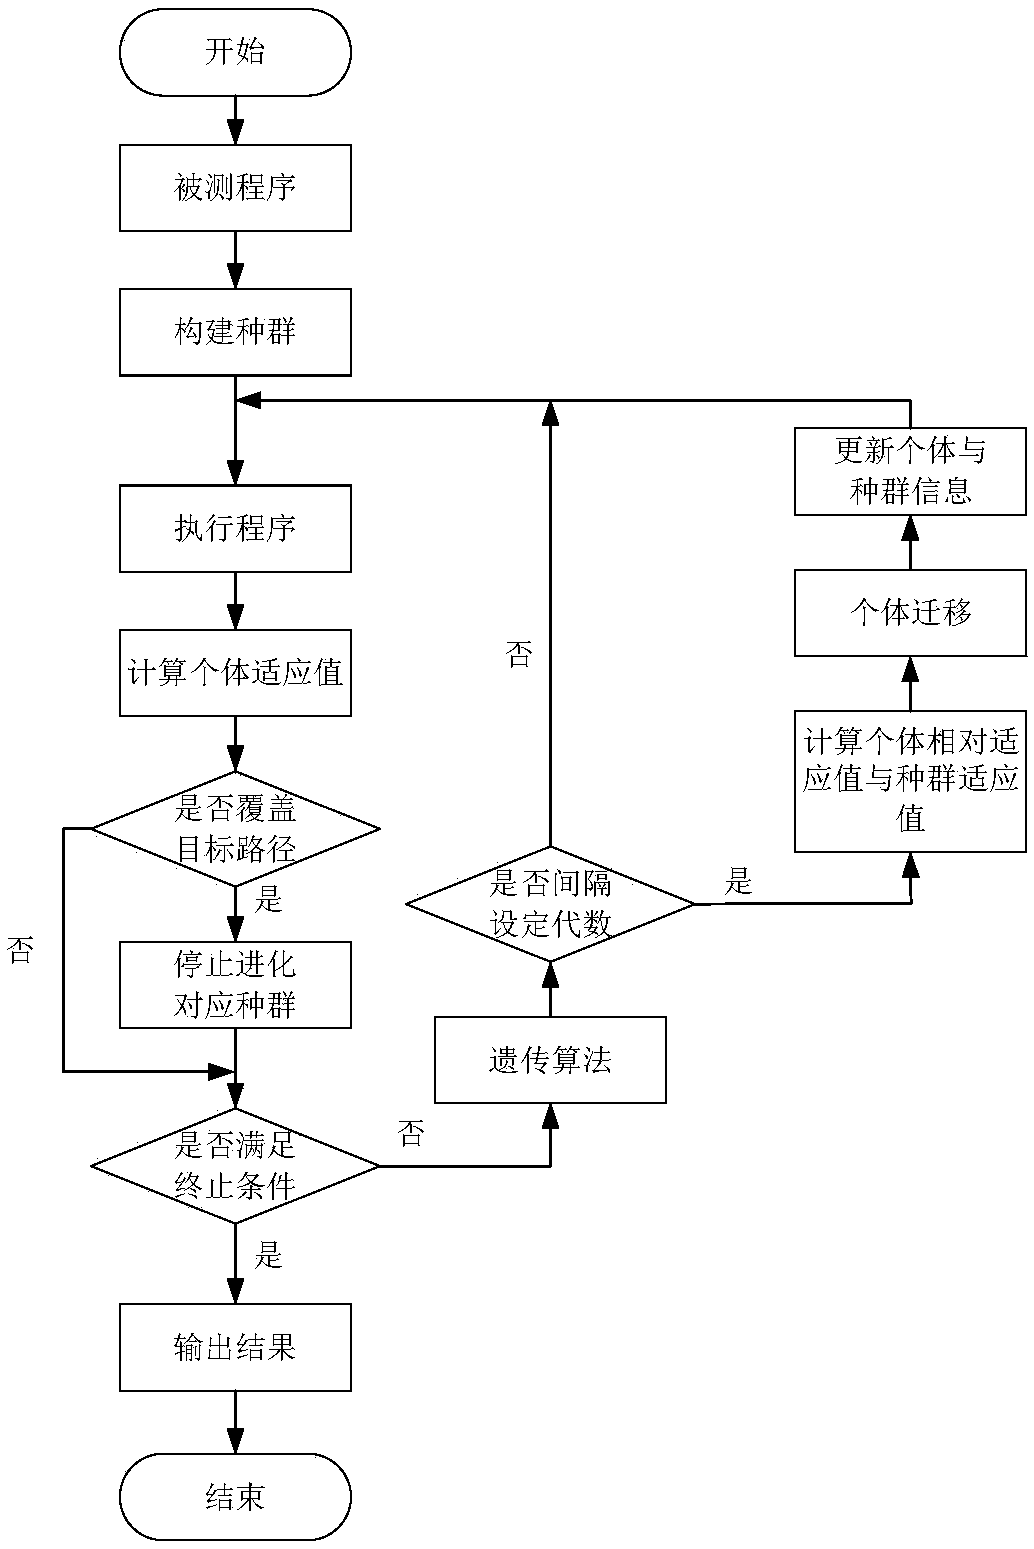 Multi-path coverage test data coevolution generation method for message-passing parallel program